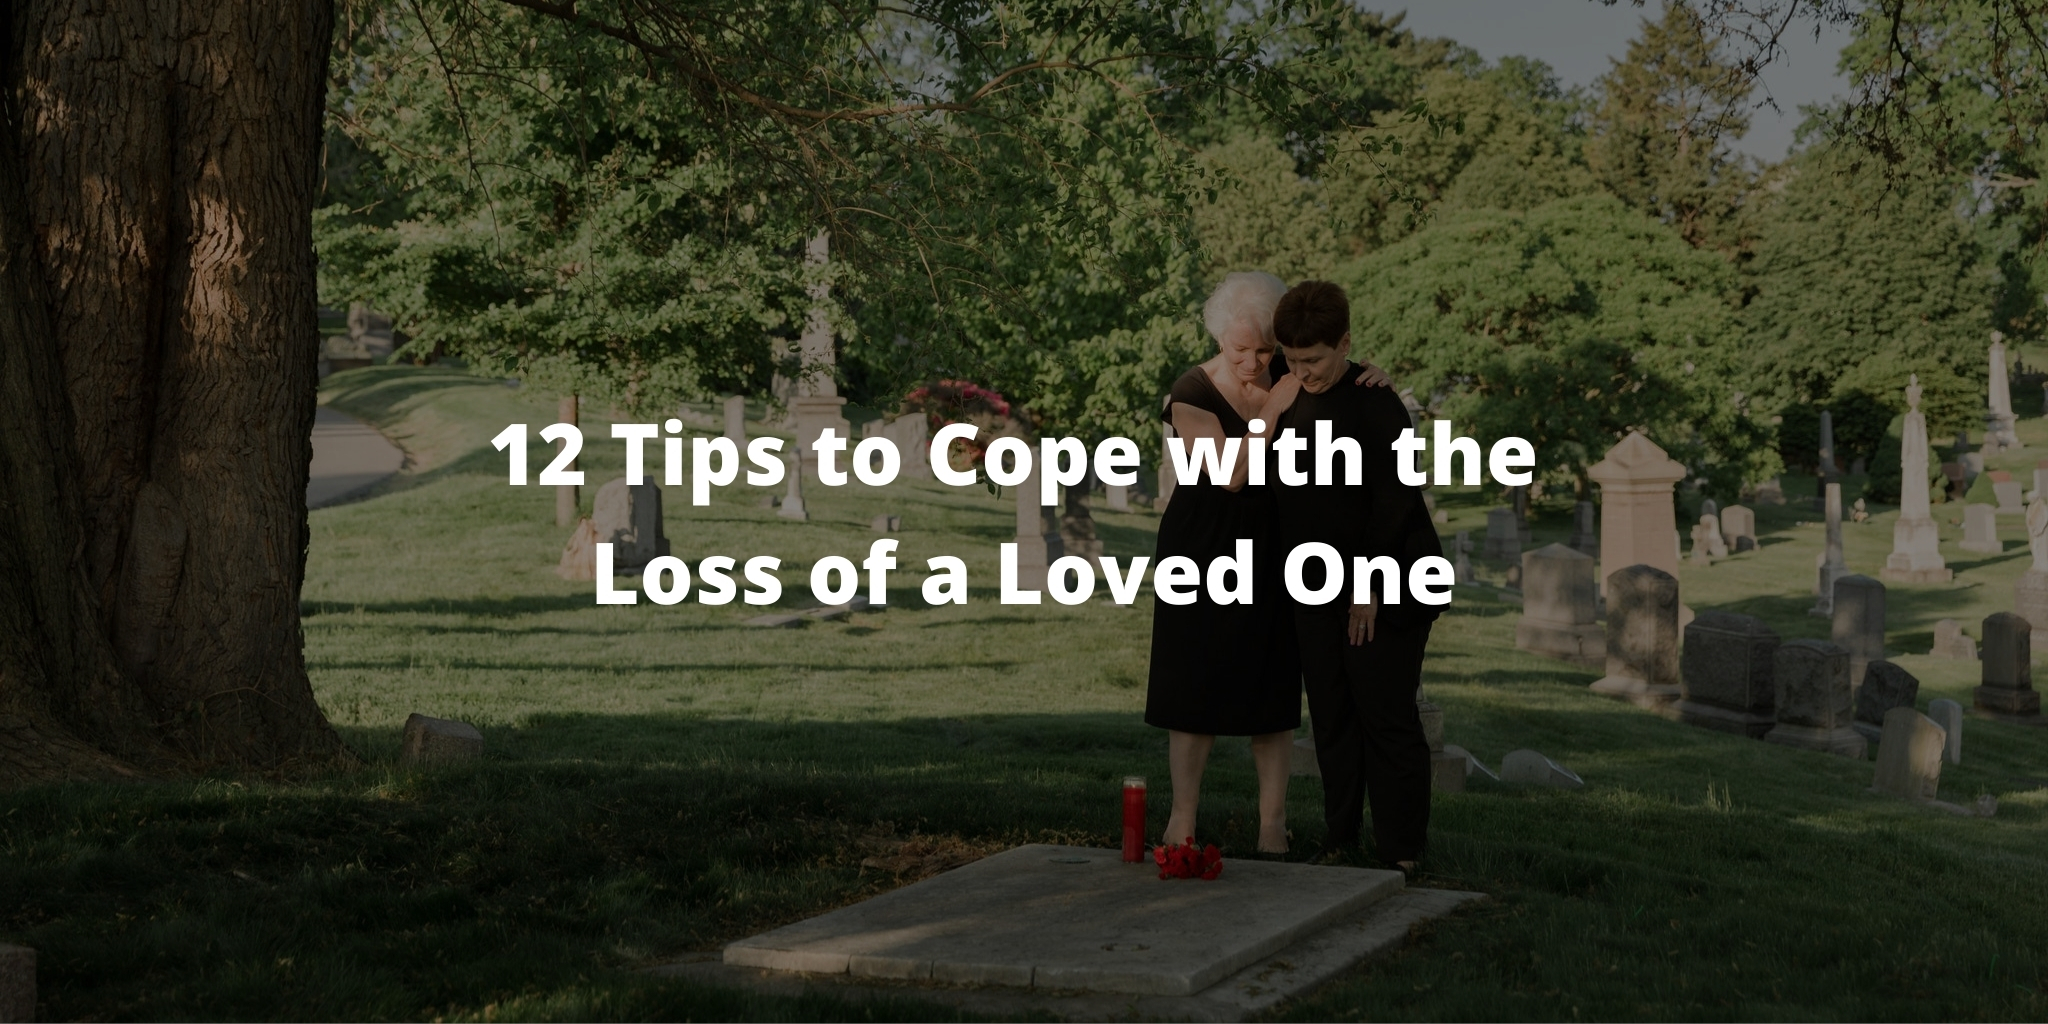 12 Tips to Cope with the Loss of a Loved One